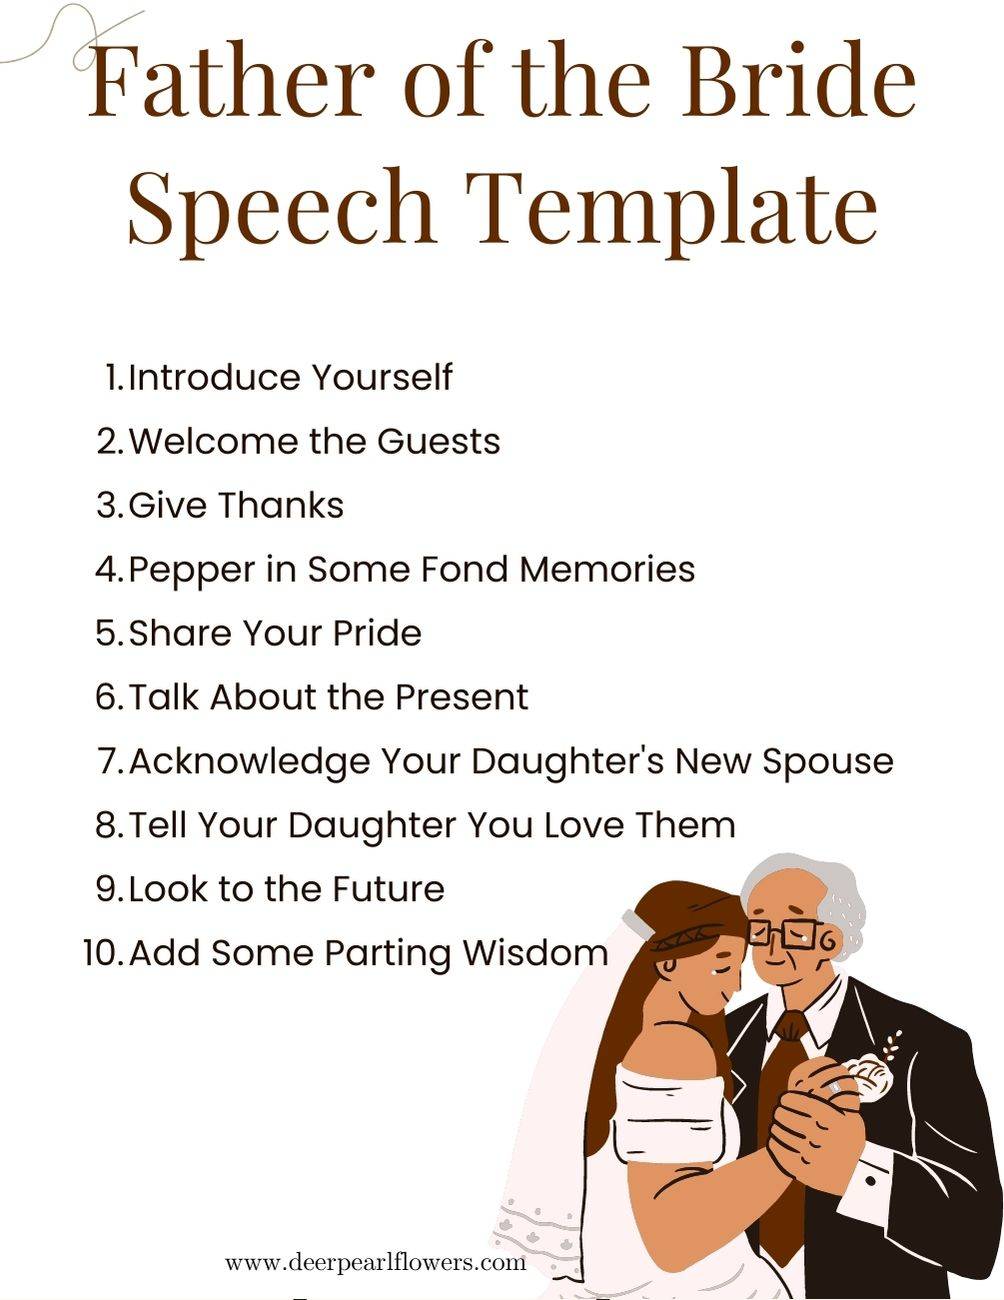 Father of the Bride Speech Template Outline